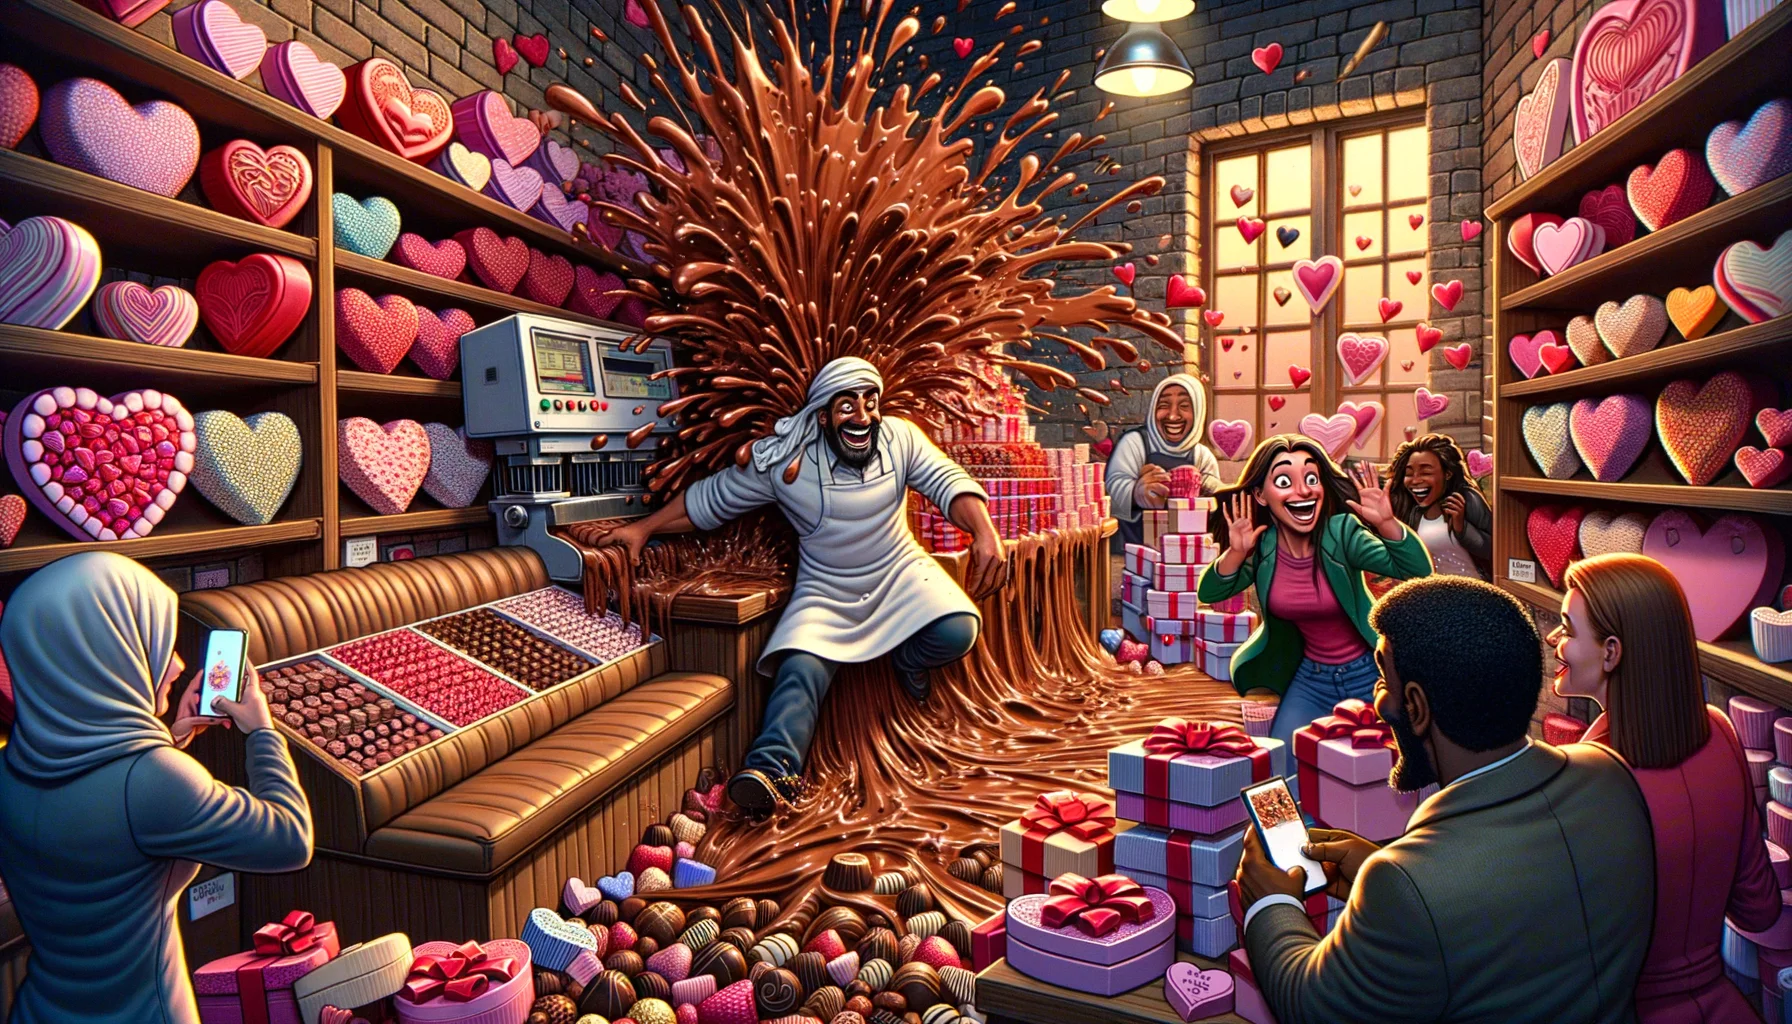 Imagine a humorous scene unfolding on Valentine's Day, set in a whimsical chocolate shop. A wide array of assorted chocolates in heart-shaped boxes, each piece intricately designed and multi-colored, lines the shelves. The characters in the scene are a flustered male shopkeeper of Middle-Eastern descent trying to handle a waterfall of chocolate flooding from a machine on overdrive, and a female customer of African descent, finding it hilarious and taking photos with her smartphone, completely amused by the chaos. Beneath all the craziness, you can feel the warm and romantic vibe typically associated with Valentine's Day.